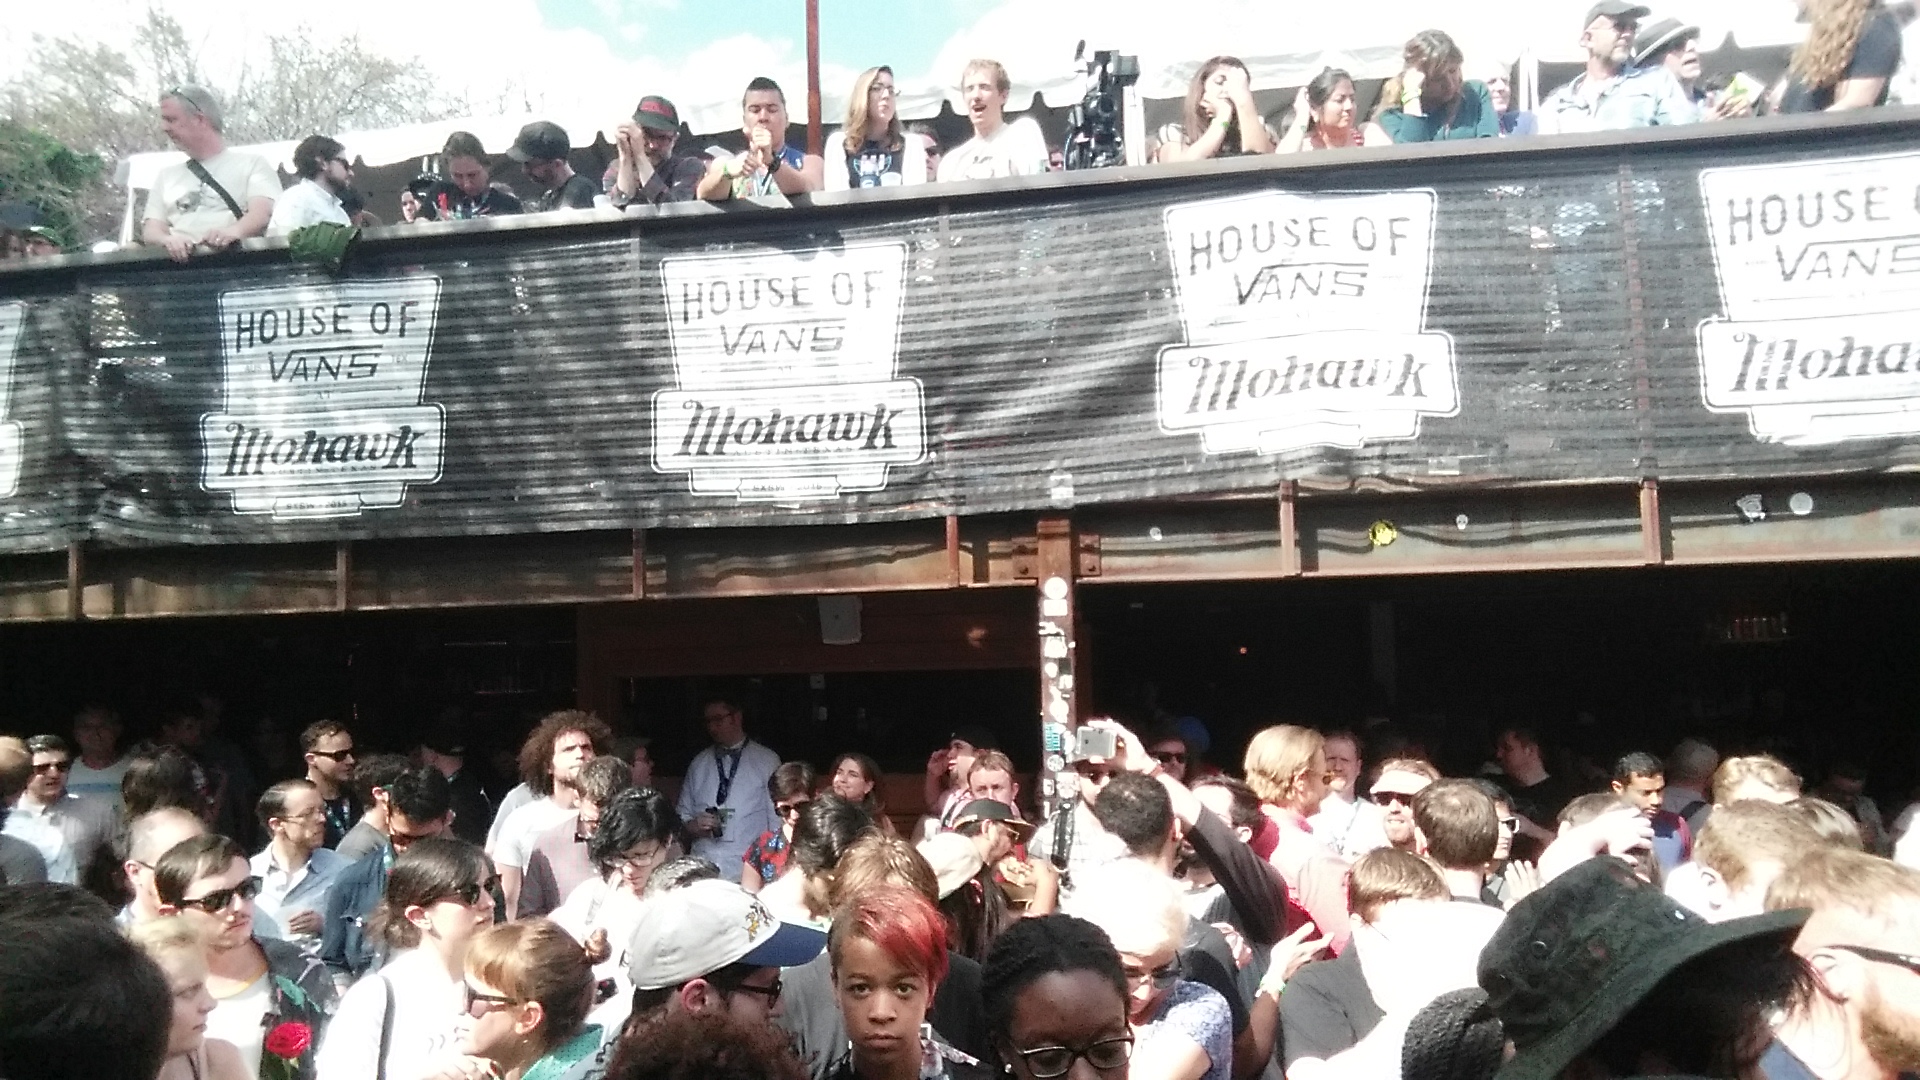 Crowd at House of Vans SXSW photos